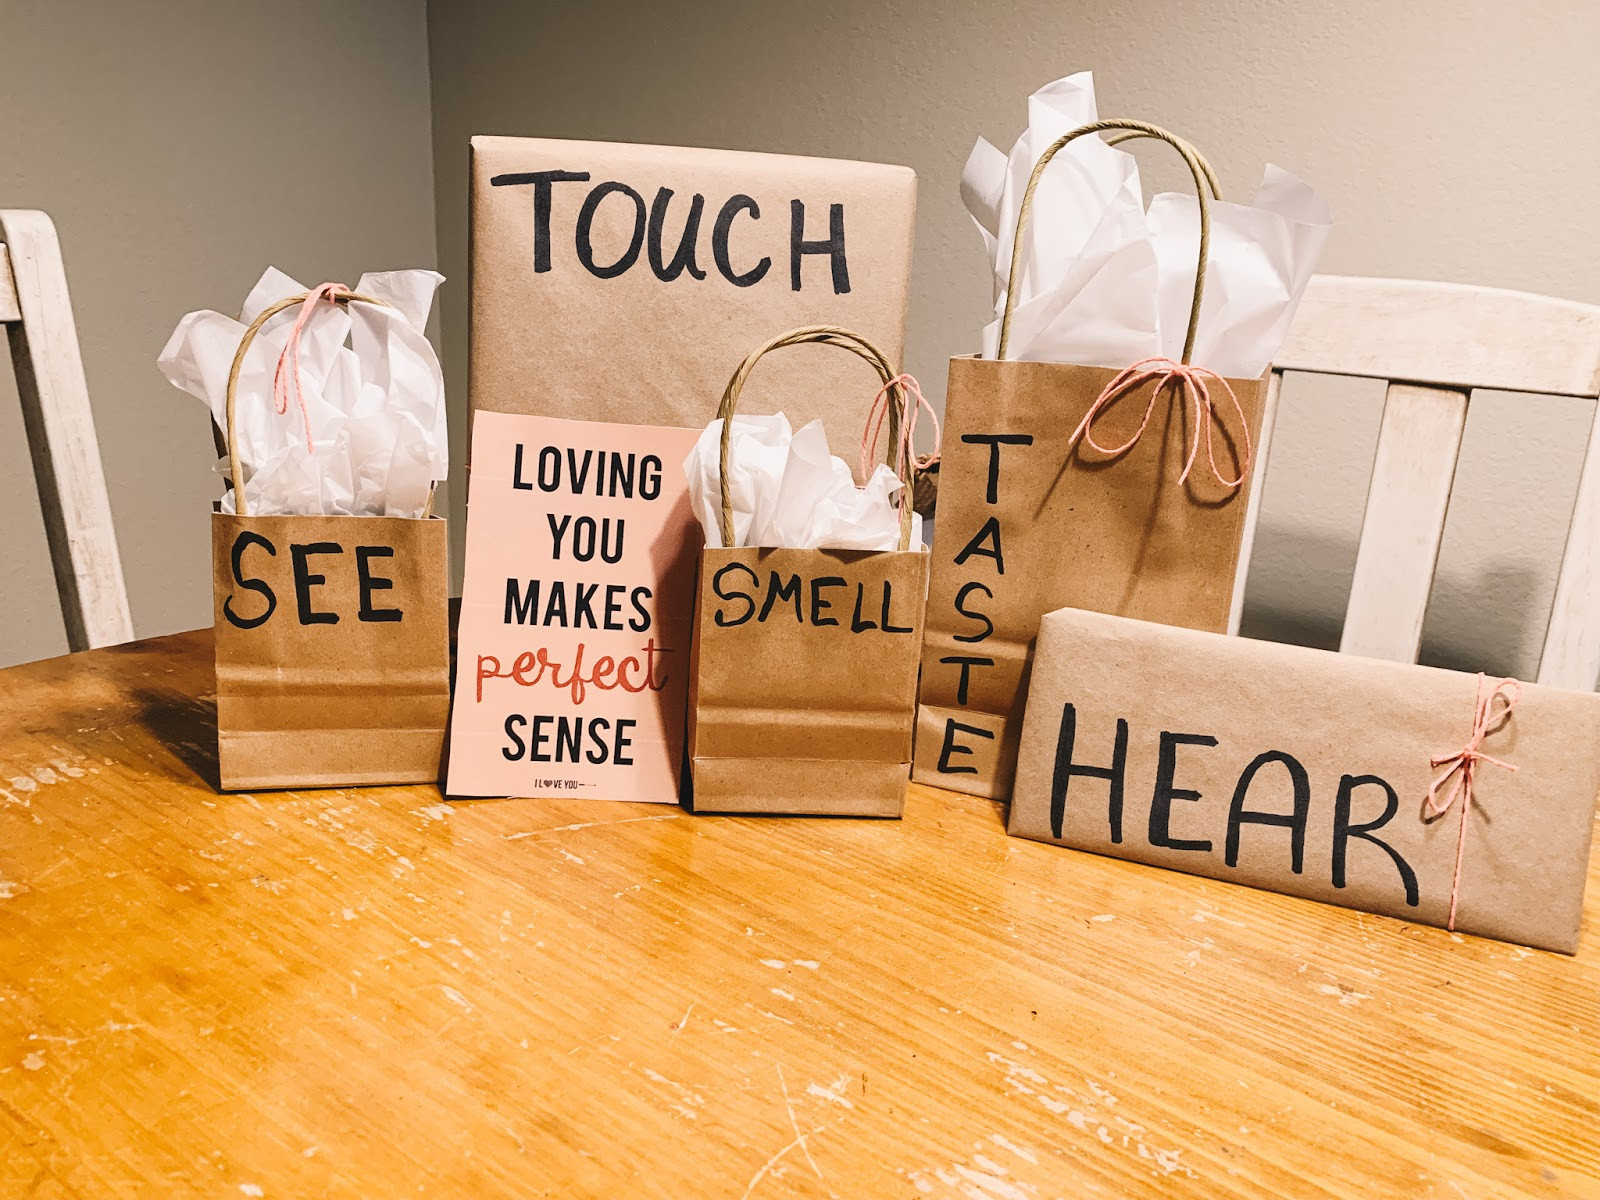 Ideas For Valentines Day Gift
 The 5 Senses Valentines Day Gift Ideas for Him & Her